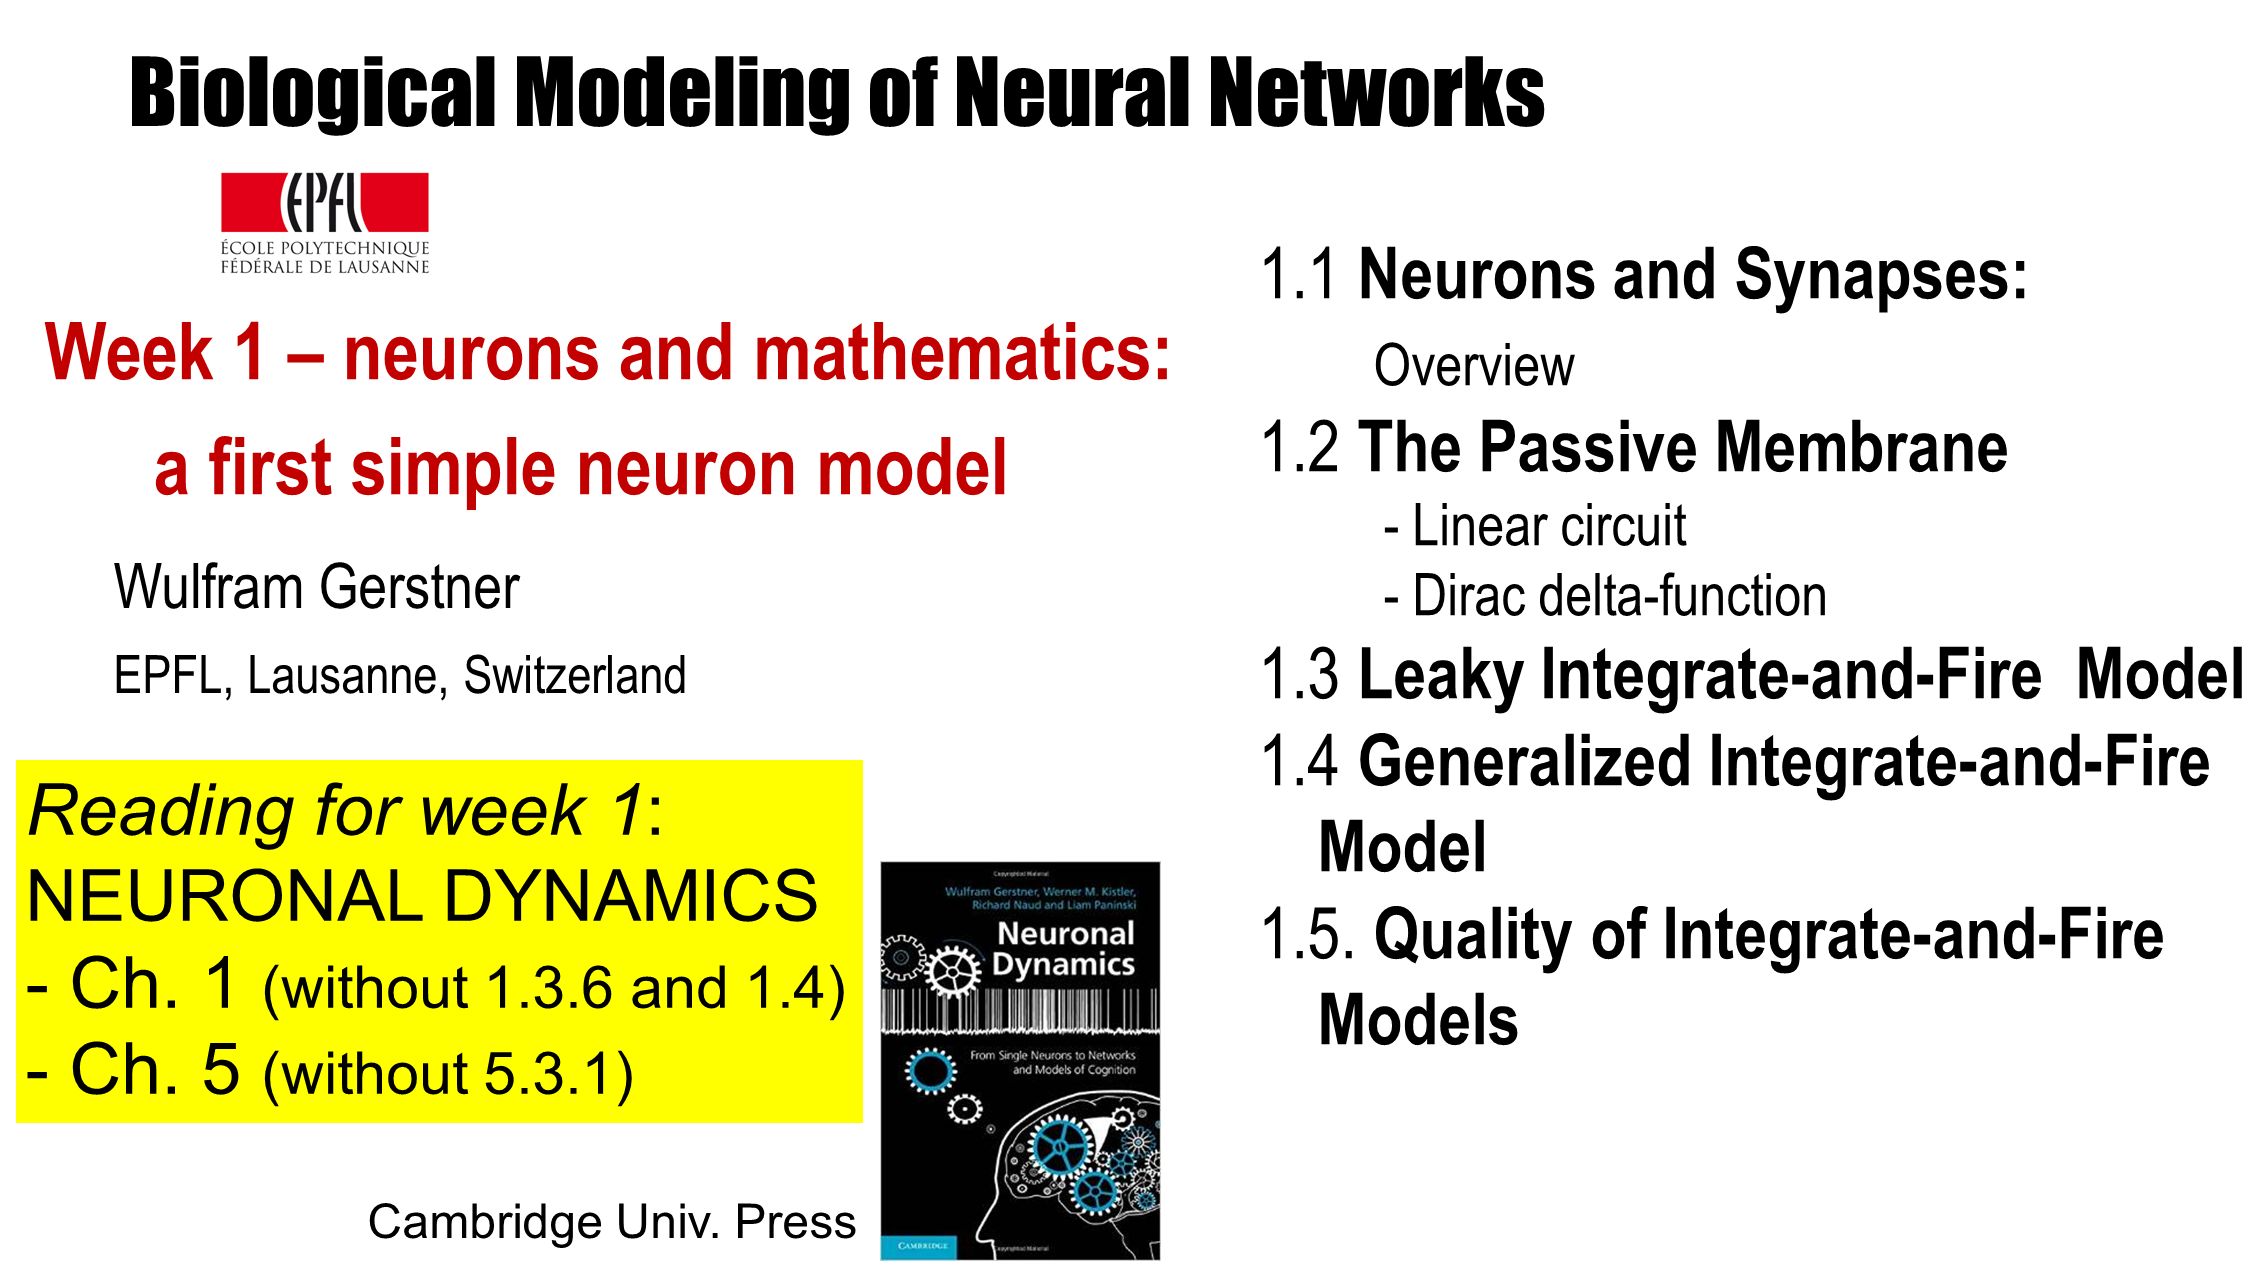 Week 1 – neurons and mathematics: a first simple neuron model Wulfram Gerstner EPFL, Lausanne, Switzerland 1.1 Neurons and Synapses: Overview 1.2 The Passive Membrane - Linear circuit - Dirac delta-function 1.3 Leaky Integrate-and-Fire Model 1.4 Generalized Integrate-and-Fire Model 1.5.